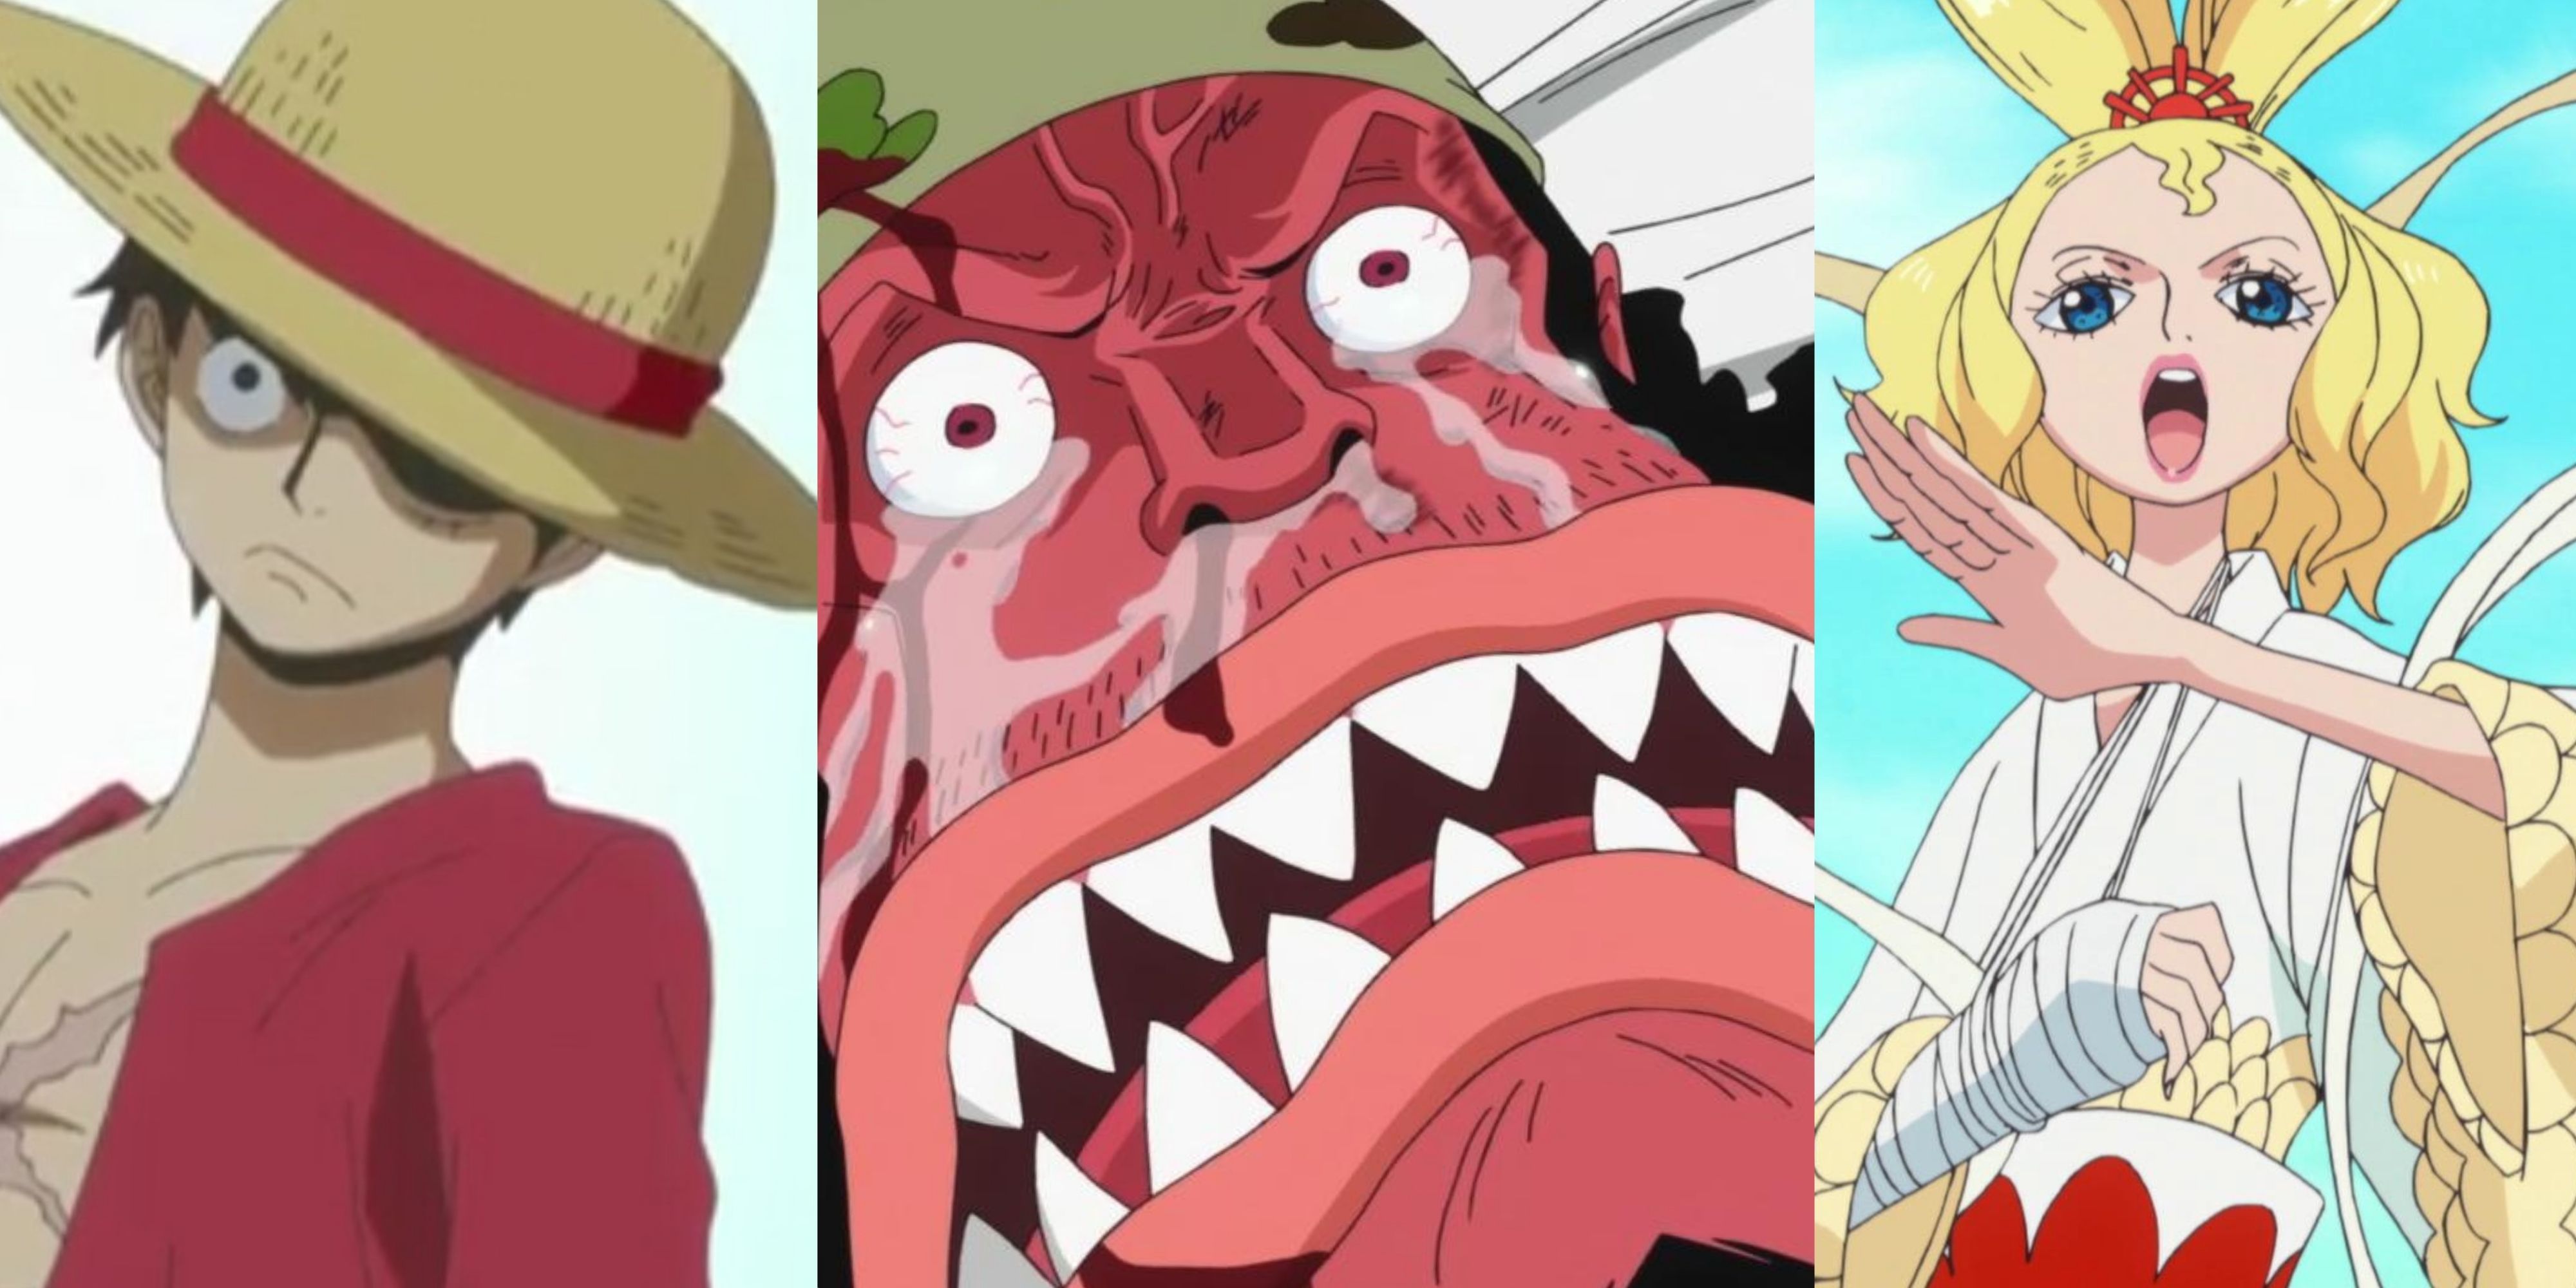 Featured One Piece Fish-Man Island Hated Luffy Fisher Tiger Otohime